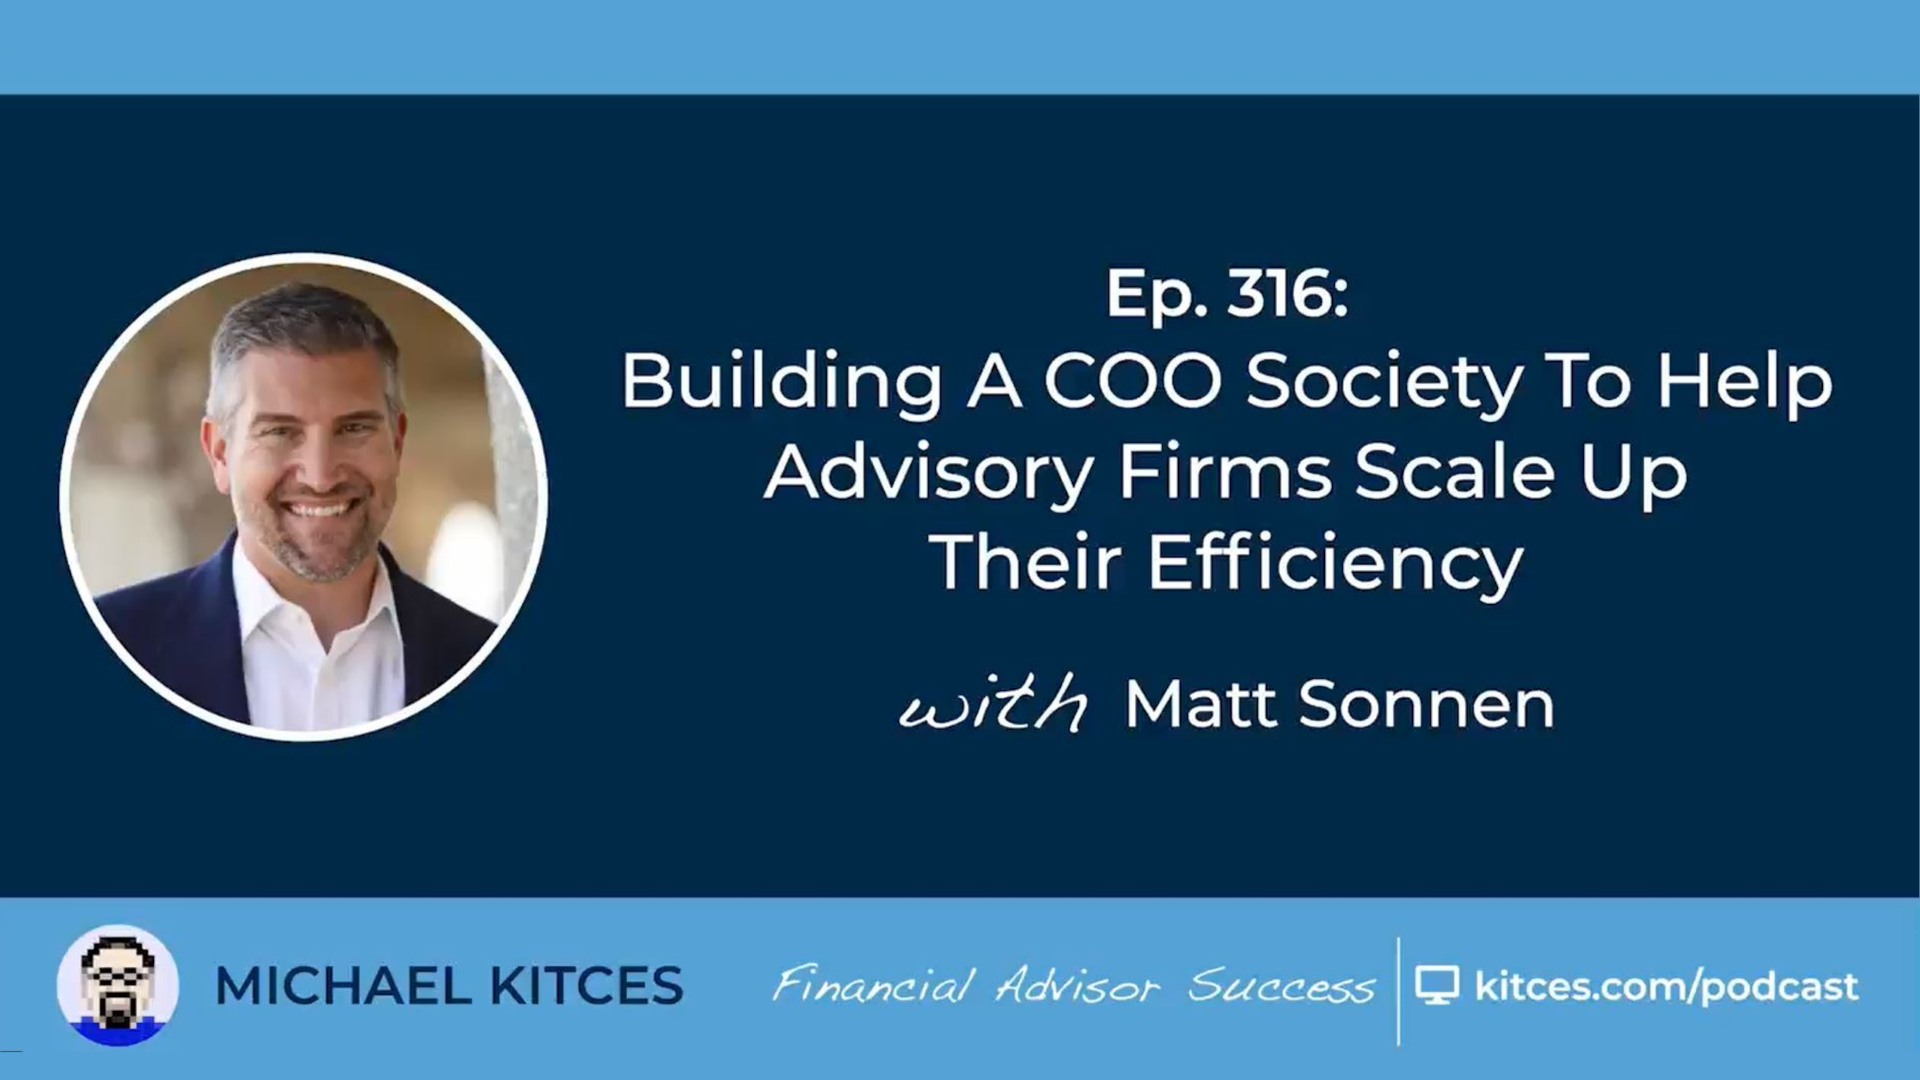 Guest Appearance: Michael Kitces’  Financial Advisor Success Podcast